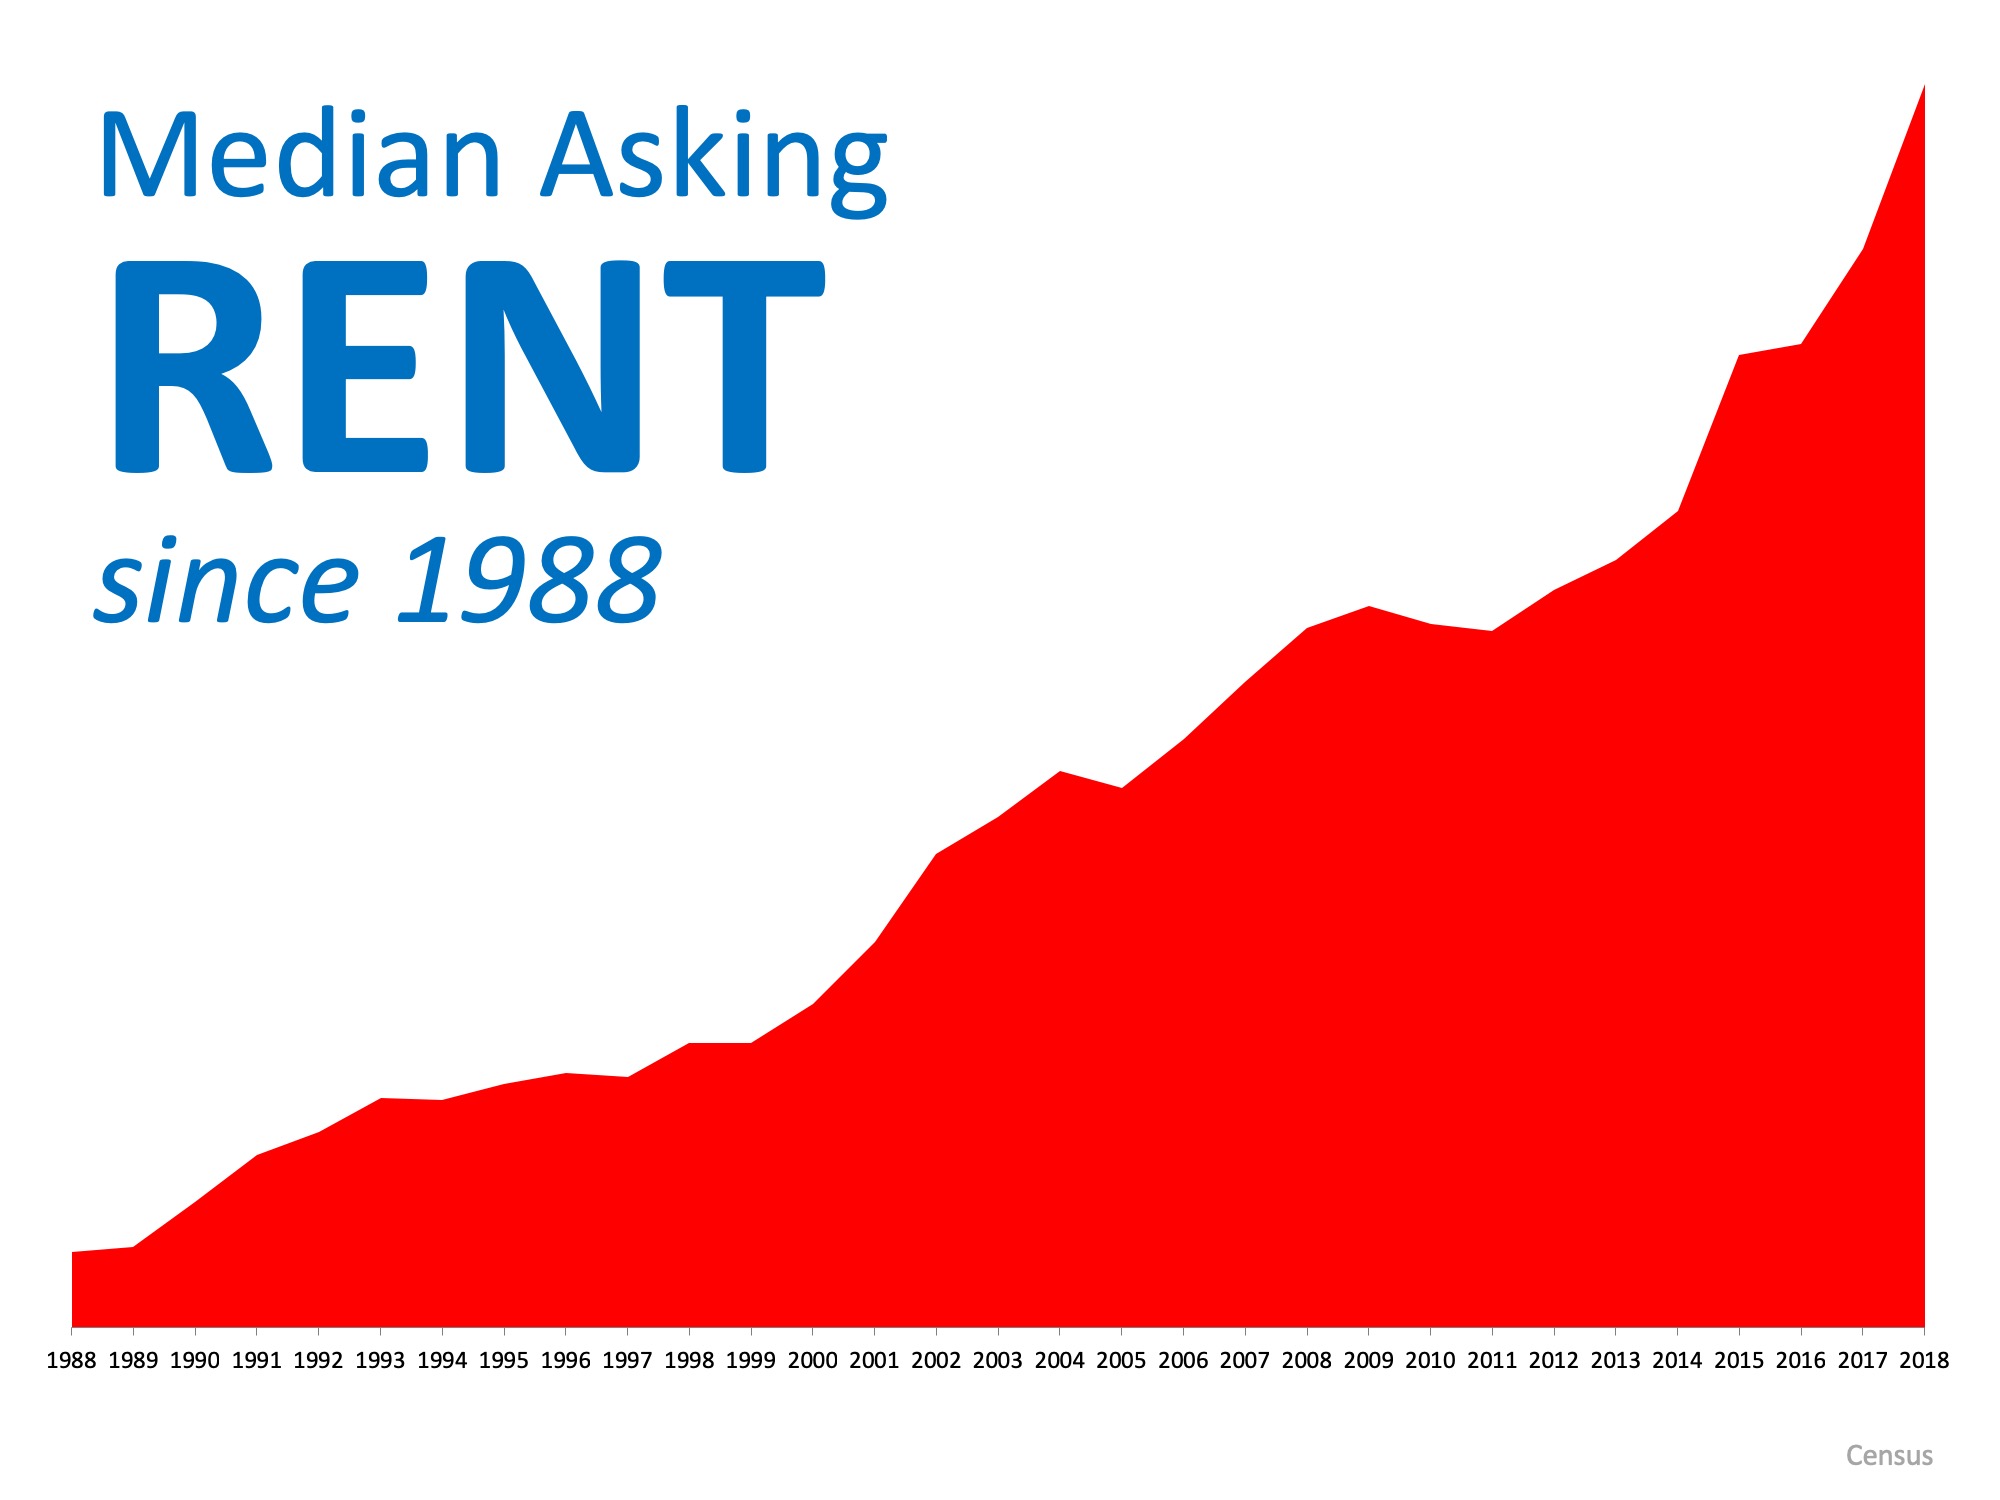 Median asking rent since 1988 infographic